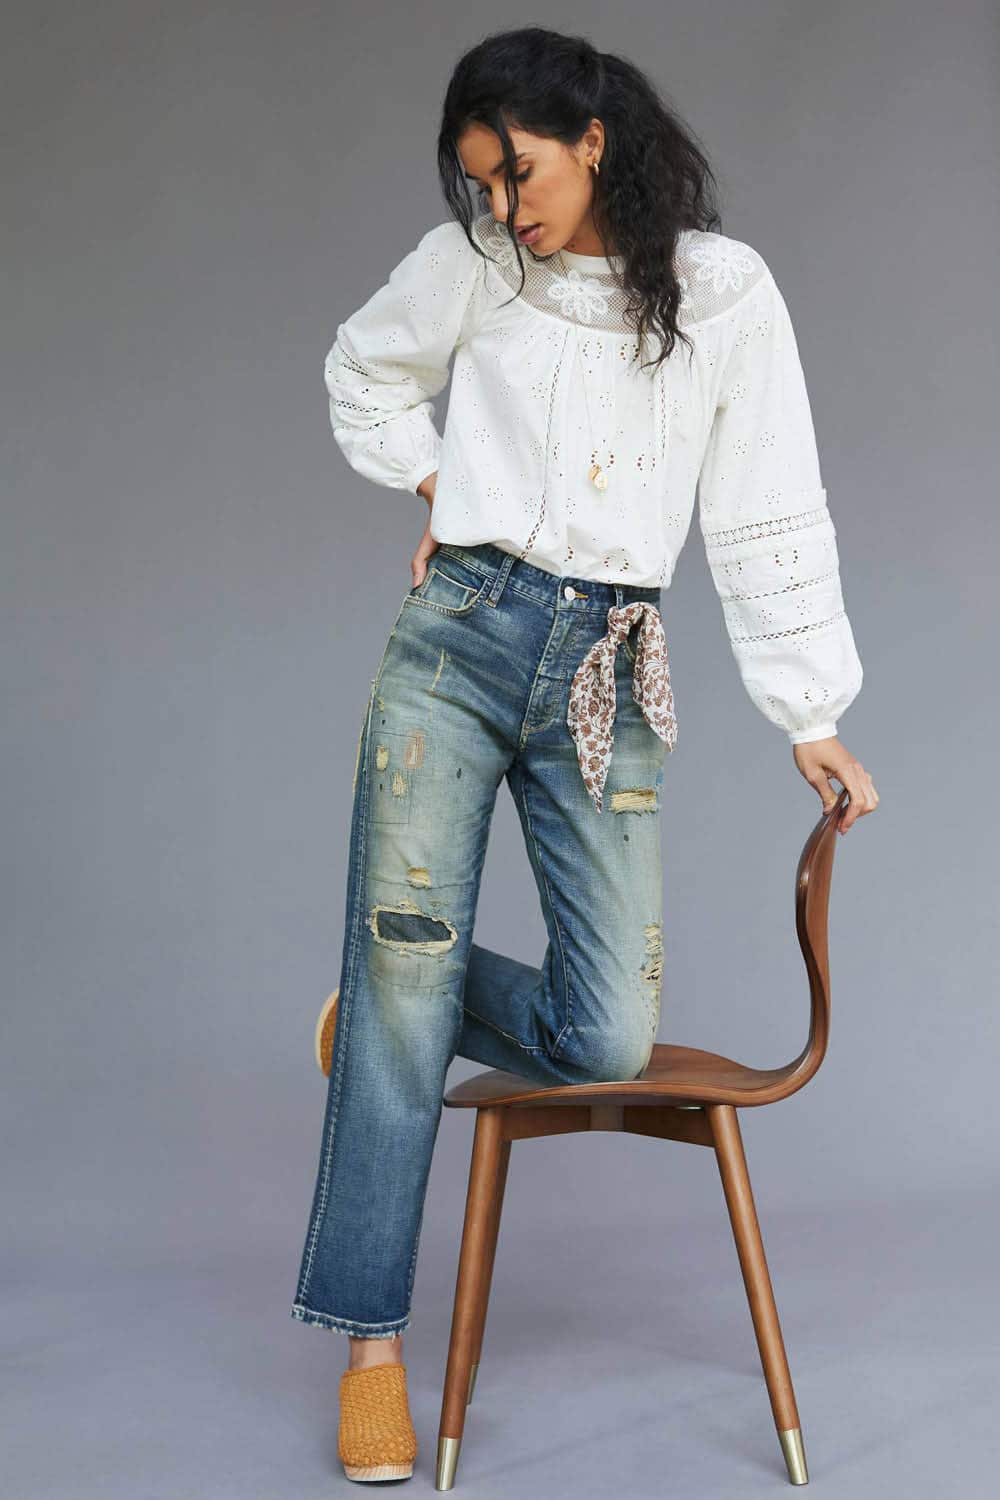 Popular jeans for women - a looser fit - Try there relaxed fit jeans 